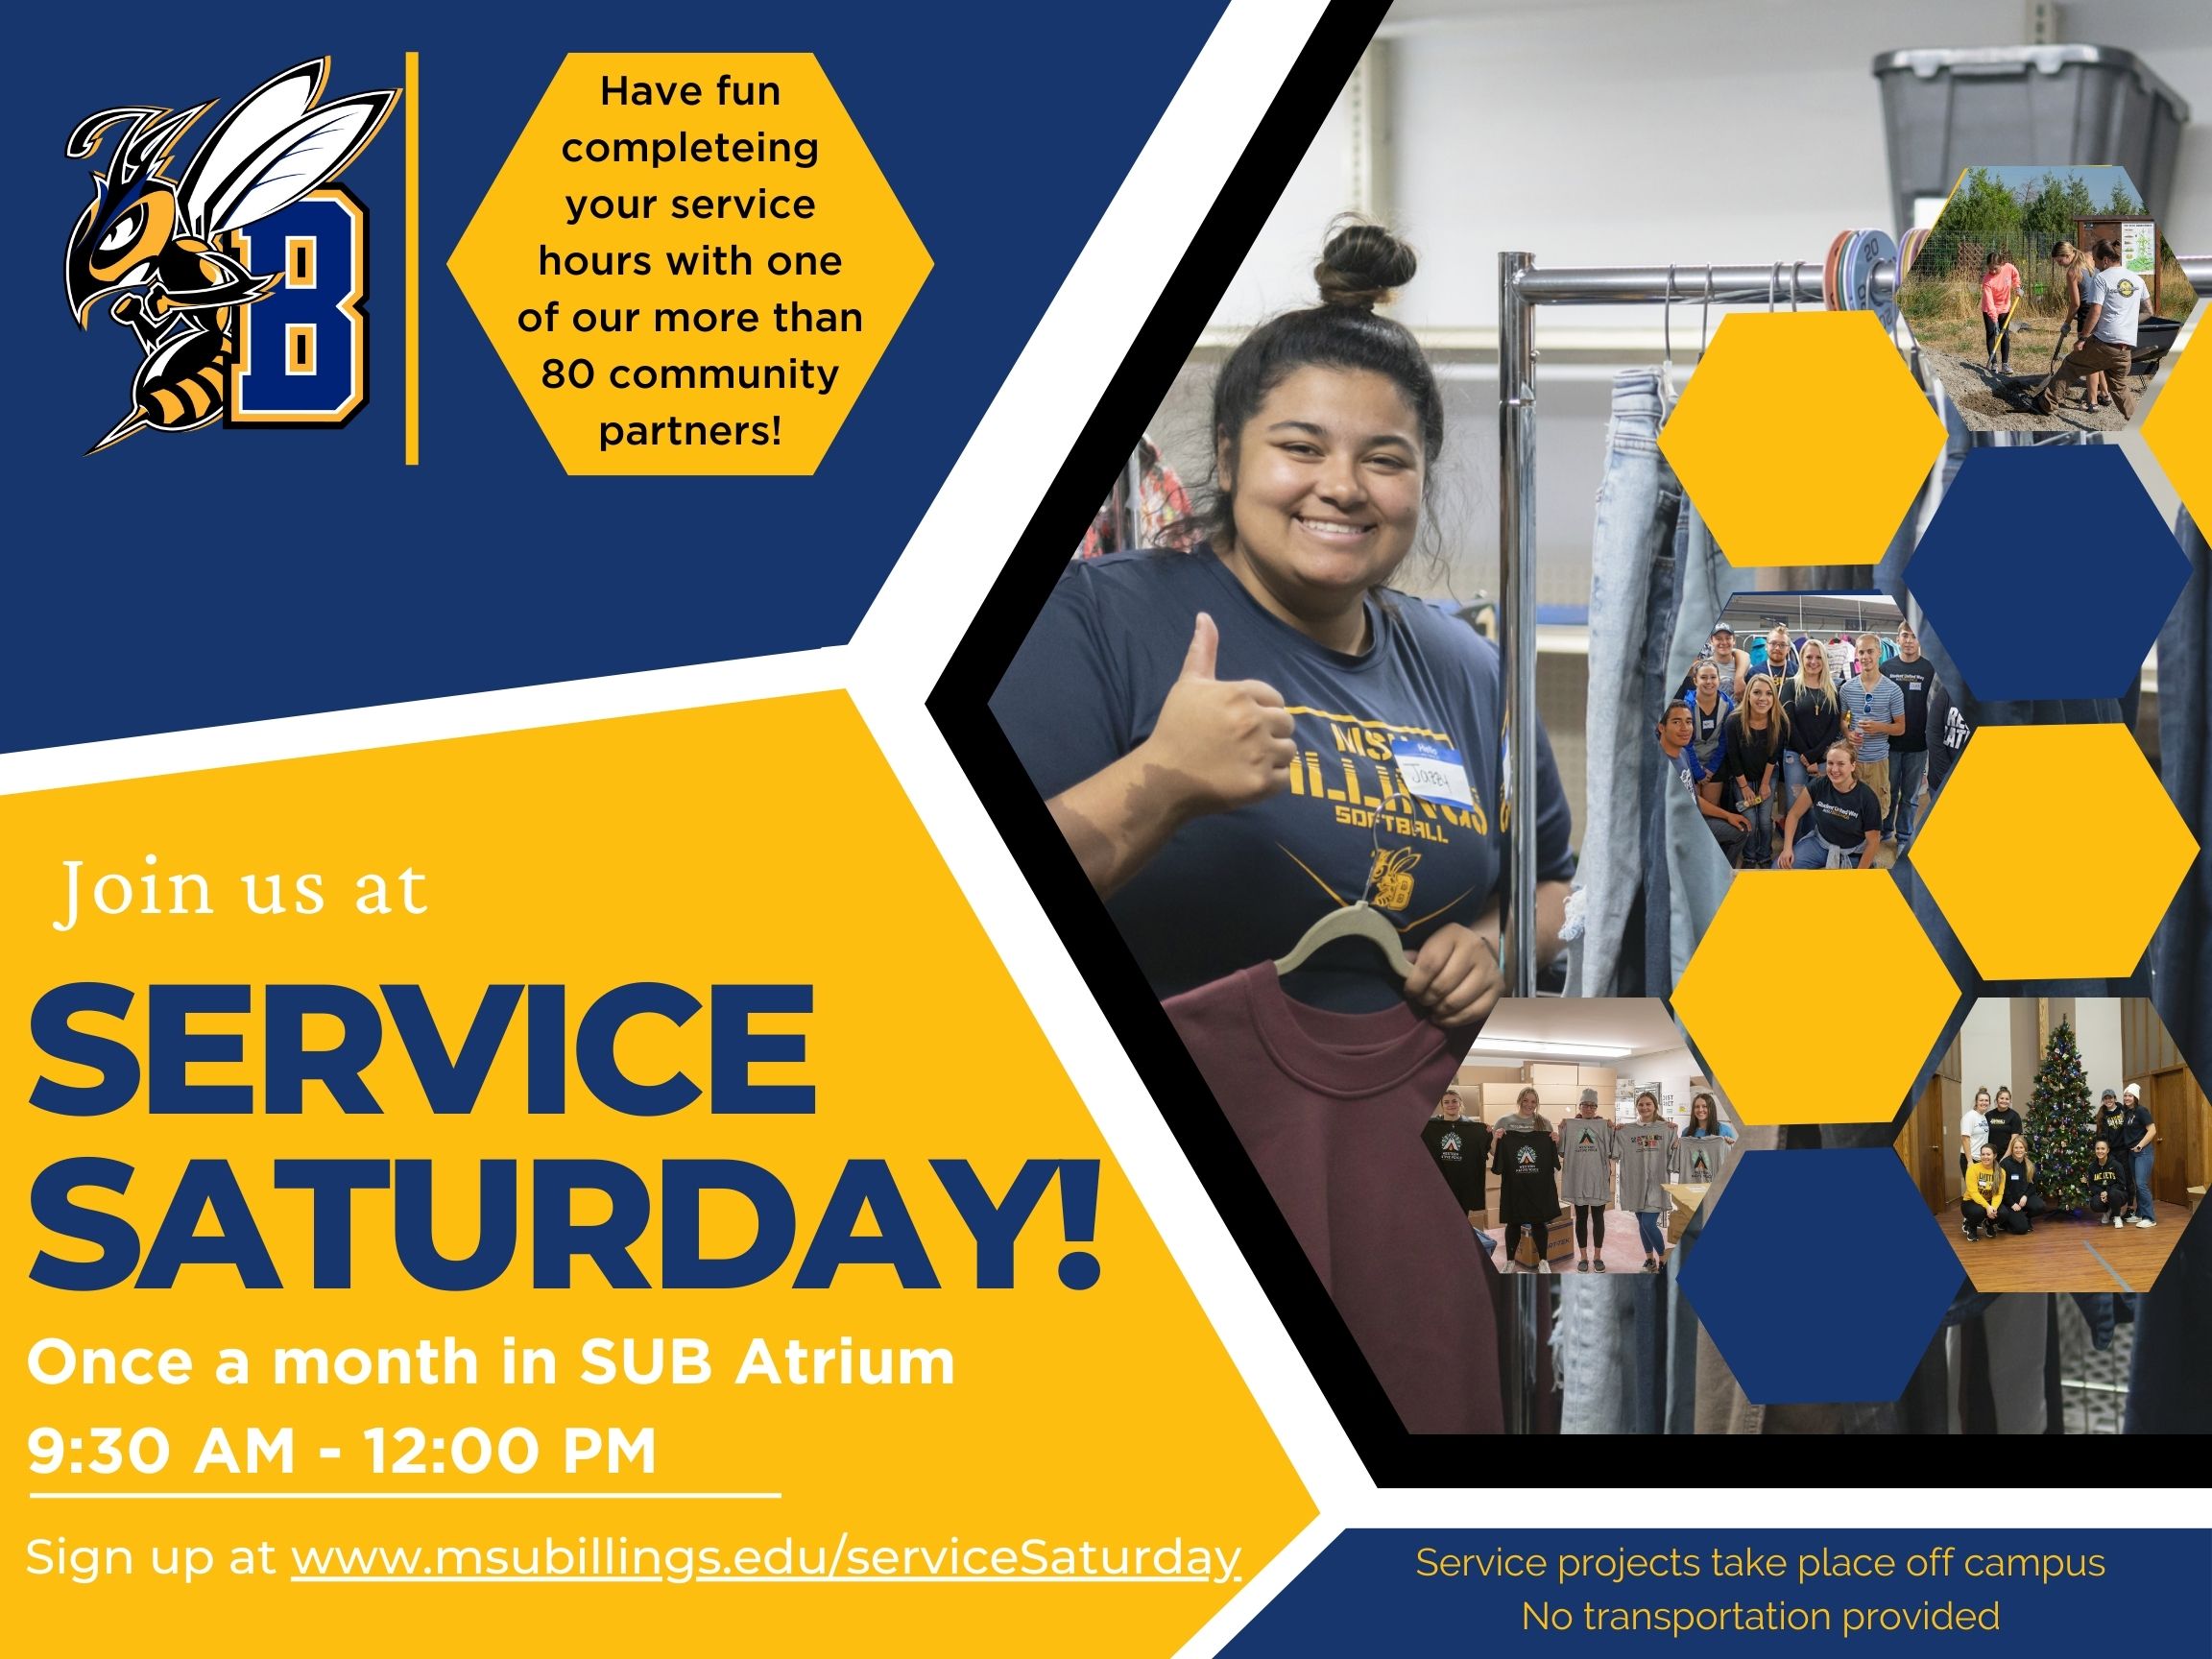 Service Saturday. Complete your service hours at one of our more than 80 community partners. Join us at Service saturday once a month in the SUB atrium 9:30-12:00 PM. Service Projects take place off campus no transportation provided